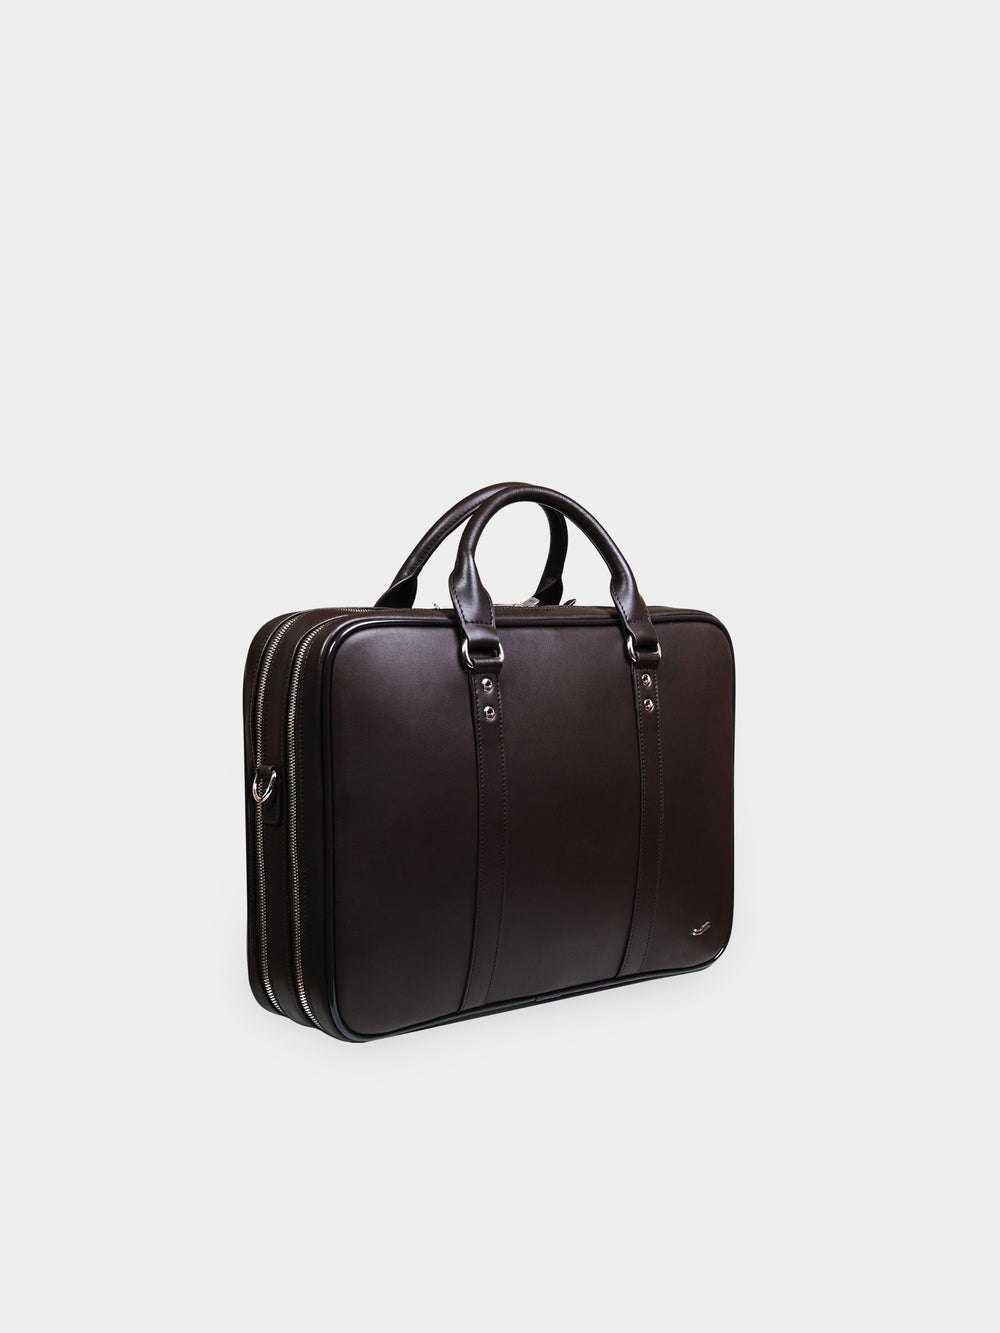 Asher Briefcase - MBG9614001 - Fossil